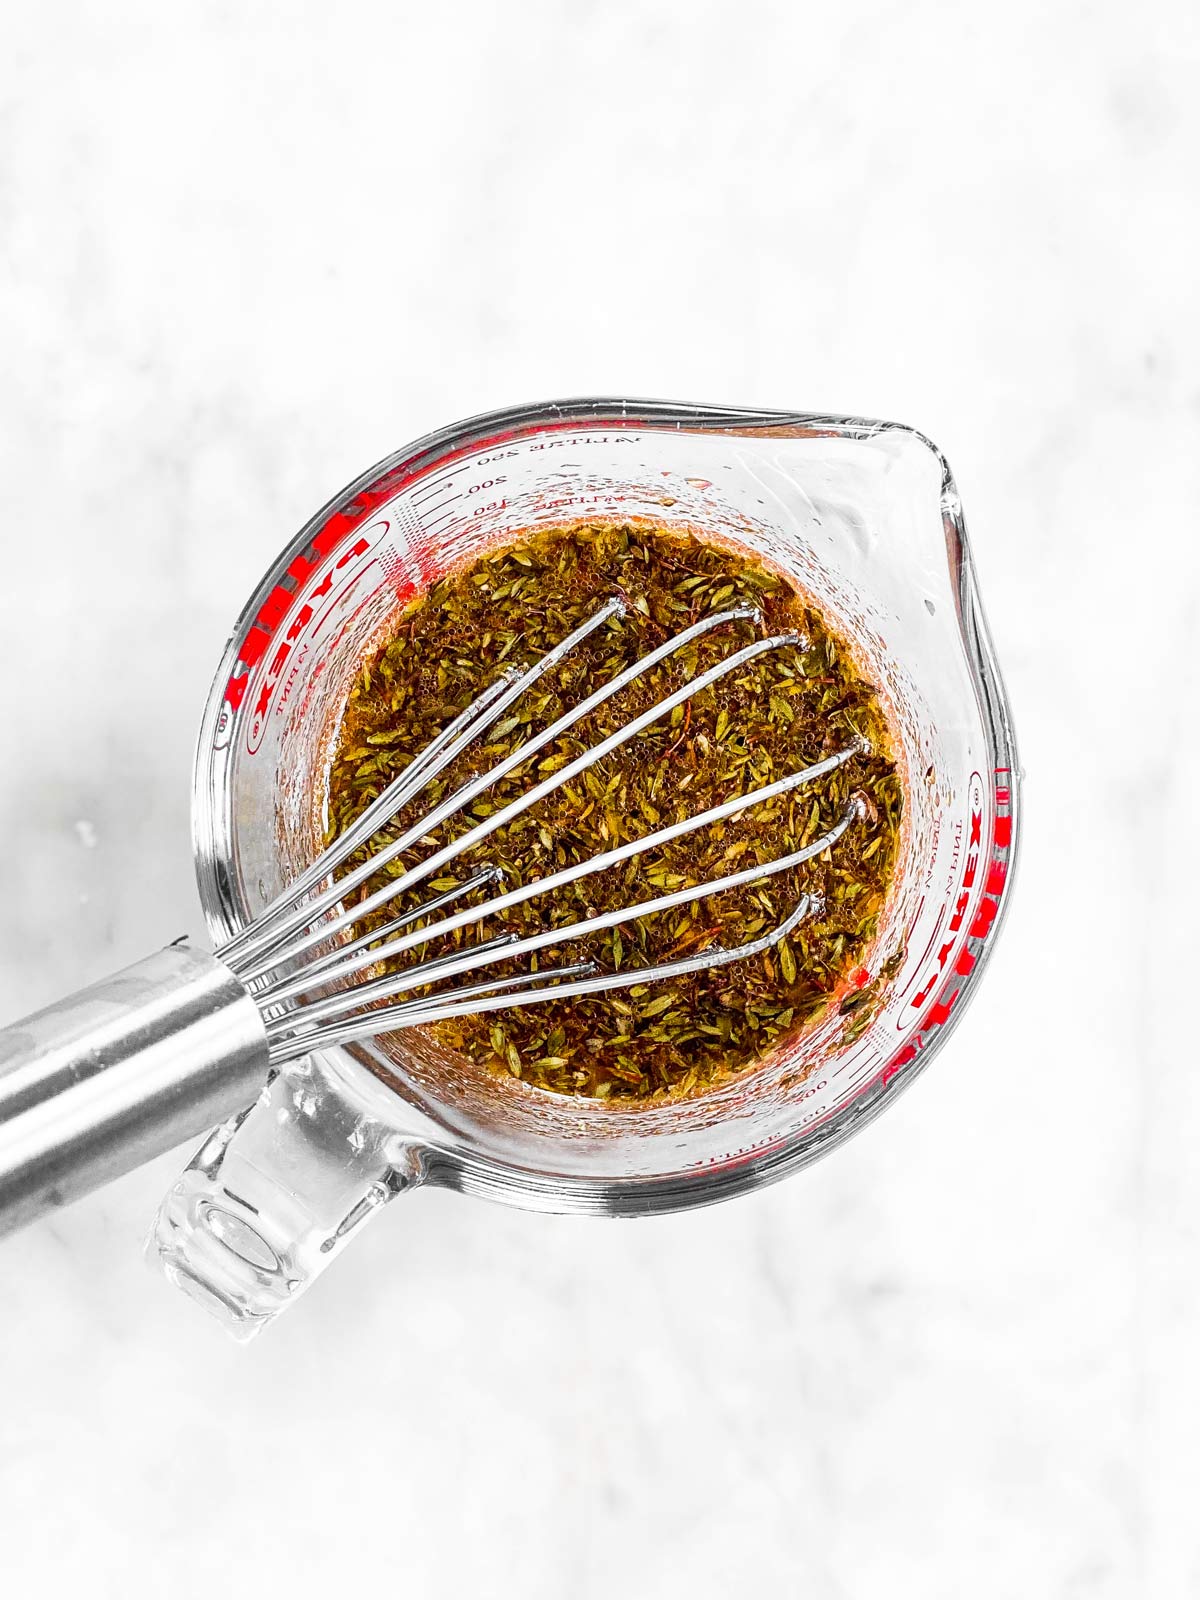 chicken marinade ingredients in glass measuring jug with metal whisk